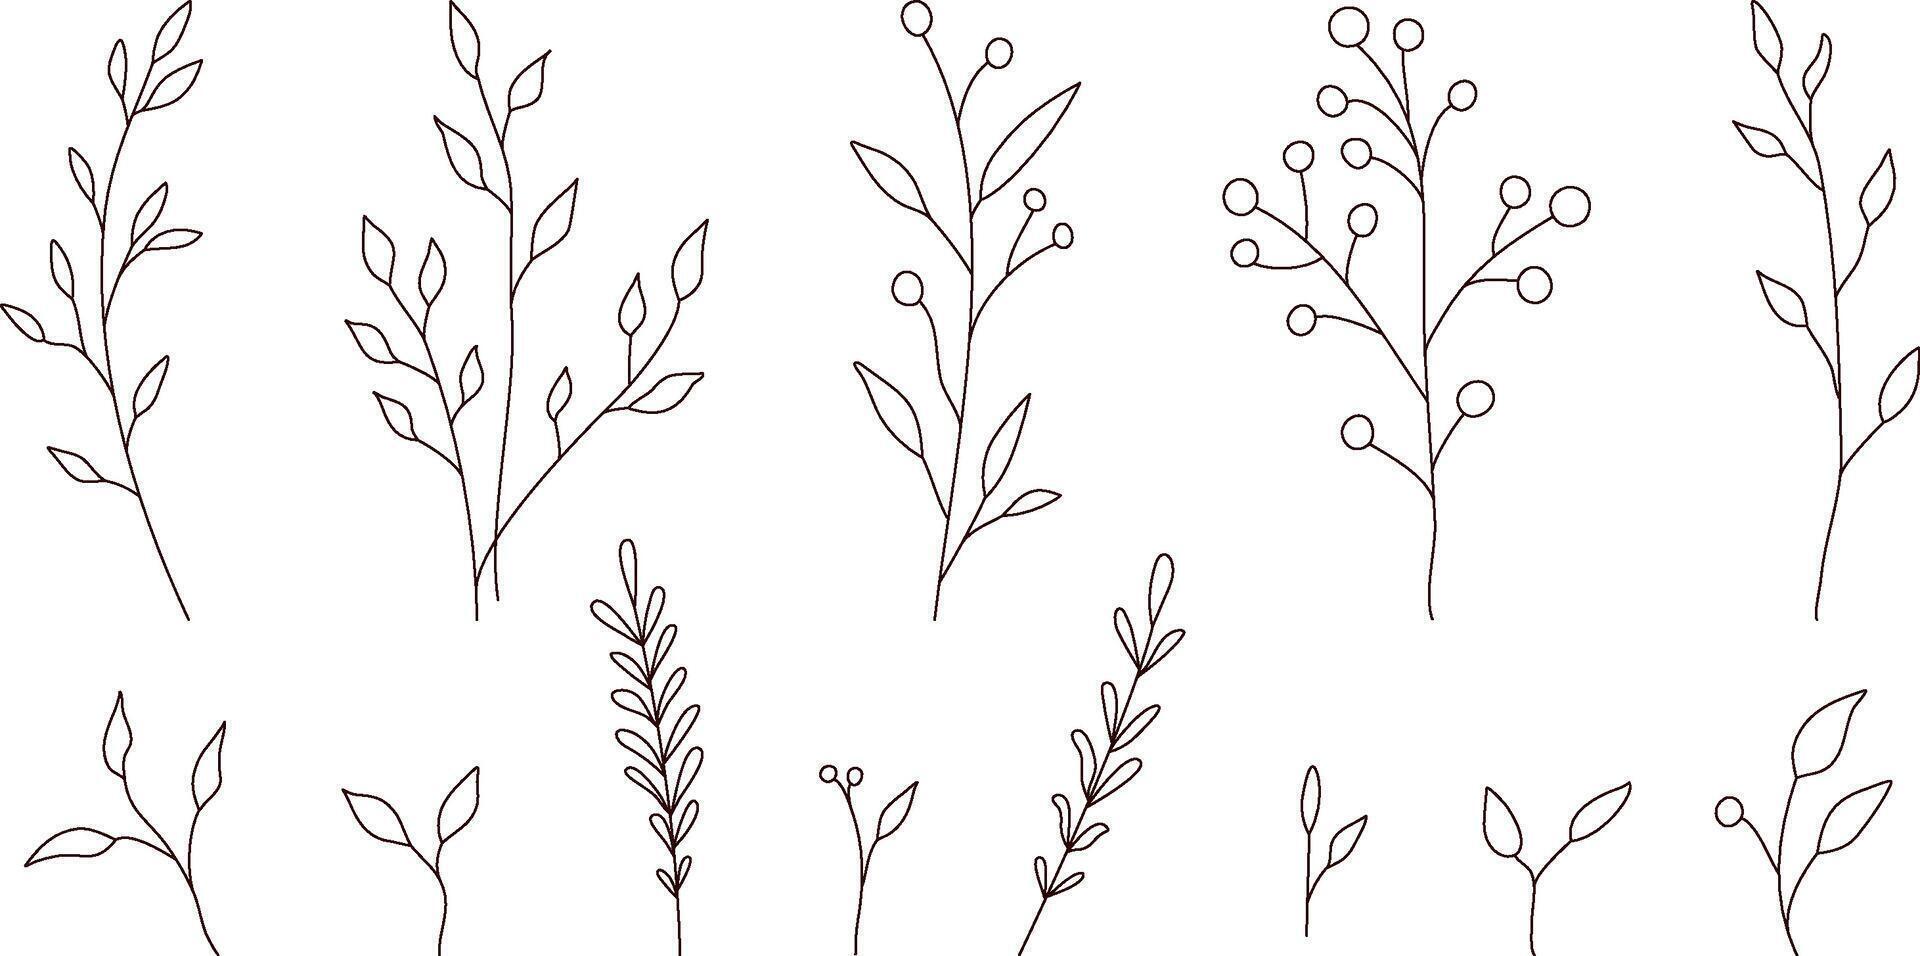 Hand drawn wild field flora, flowers, leaves, herbs, plants, branches. Minimal floral botanical line art. Vector illustration for logo or tattoo, invitations, save the date card